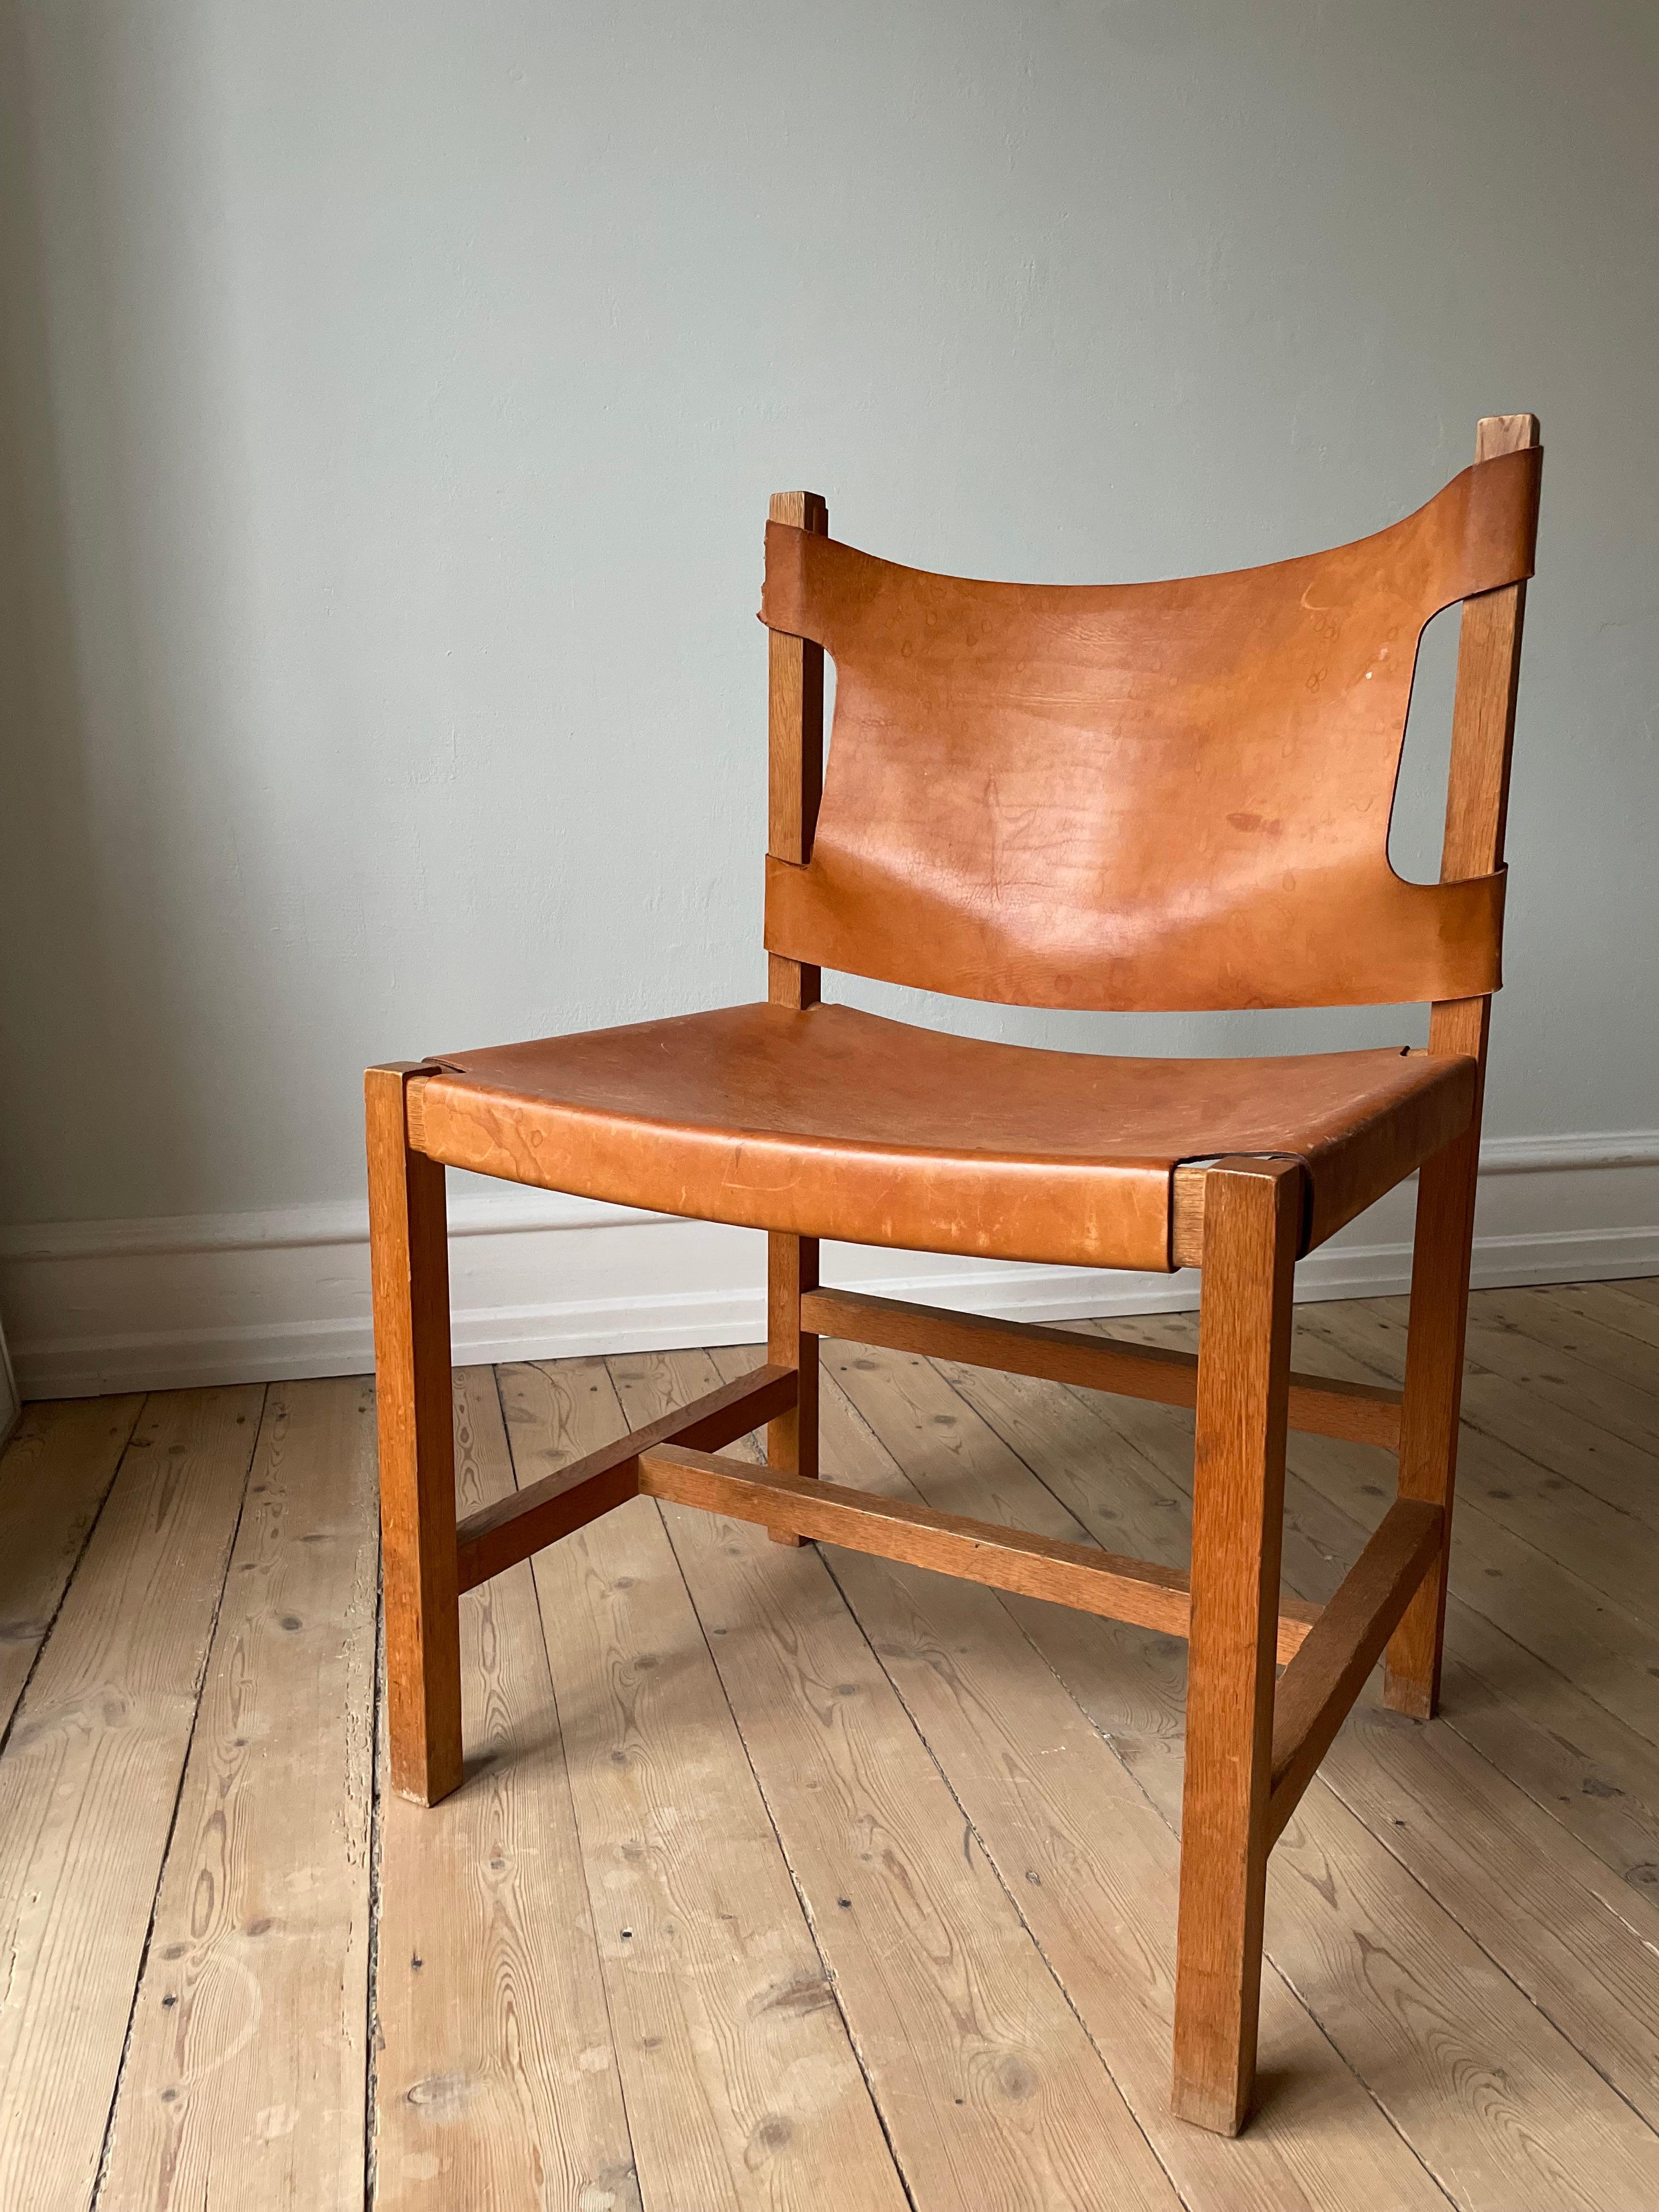 Mid-Century Modern Danish Modern Wooden Leather Seat Chair, 1960s For Sale